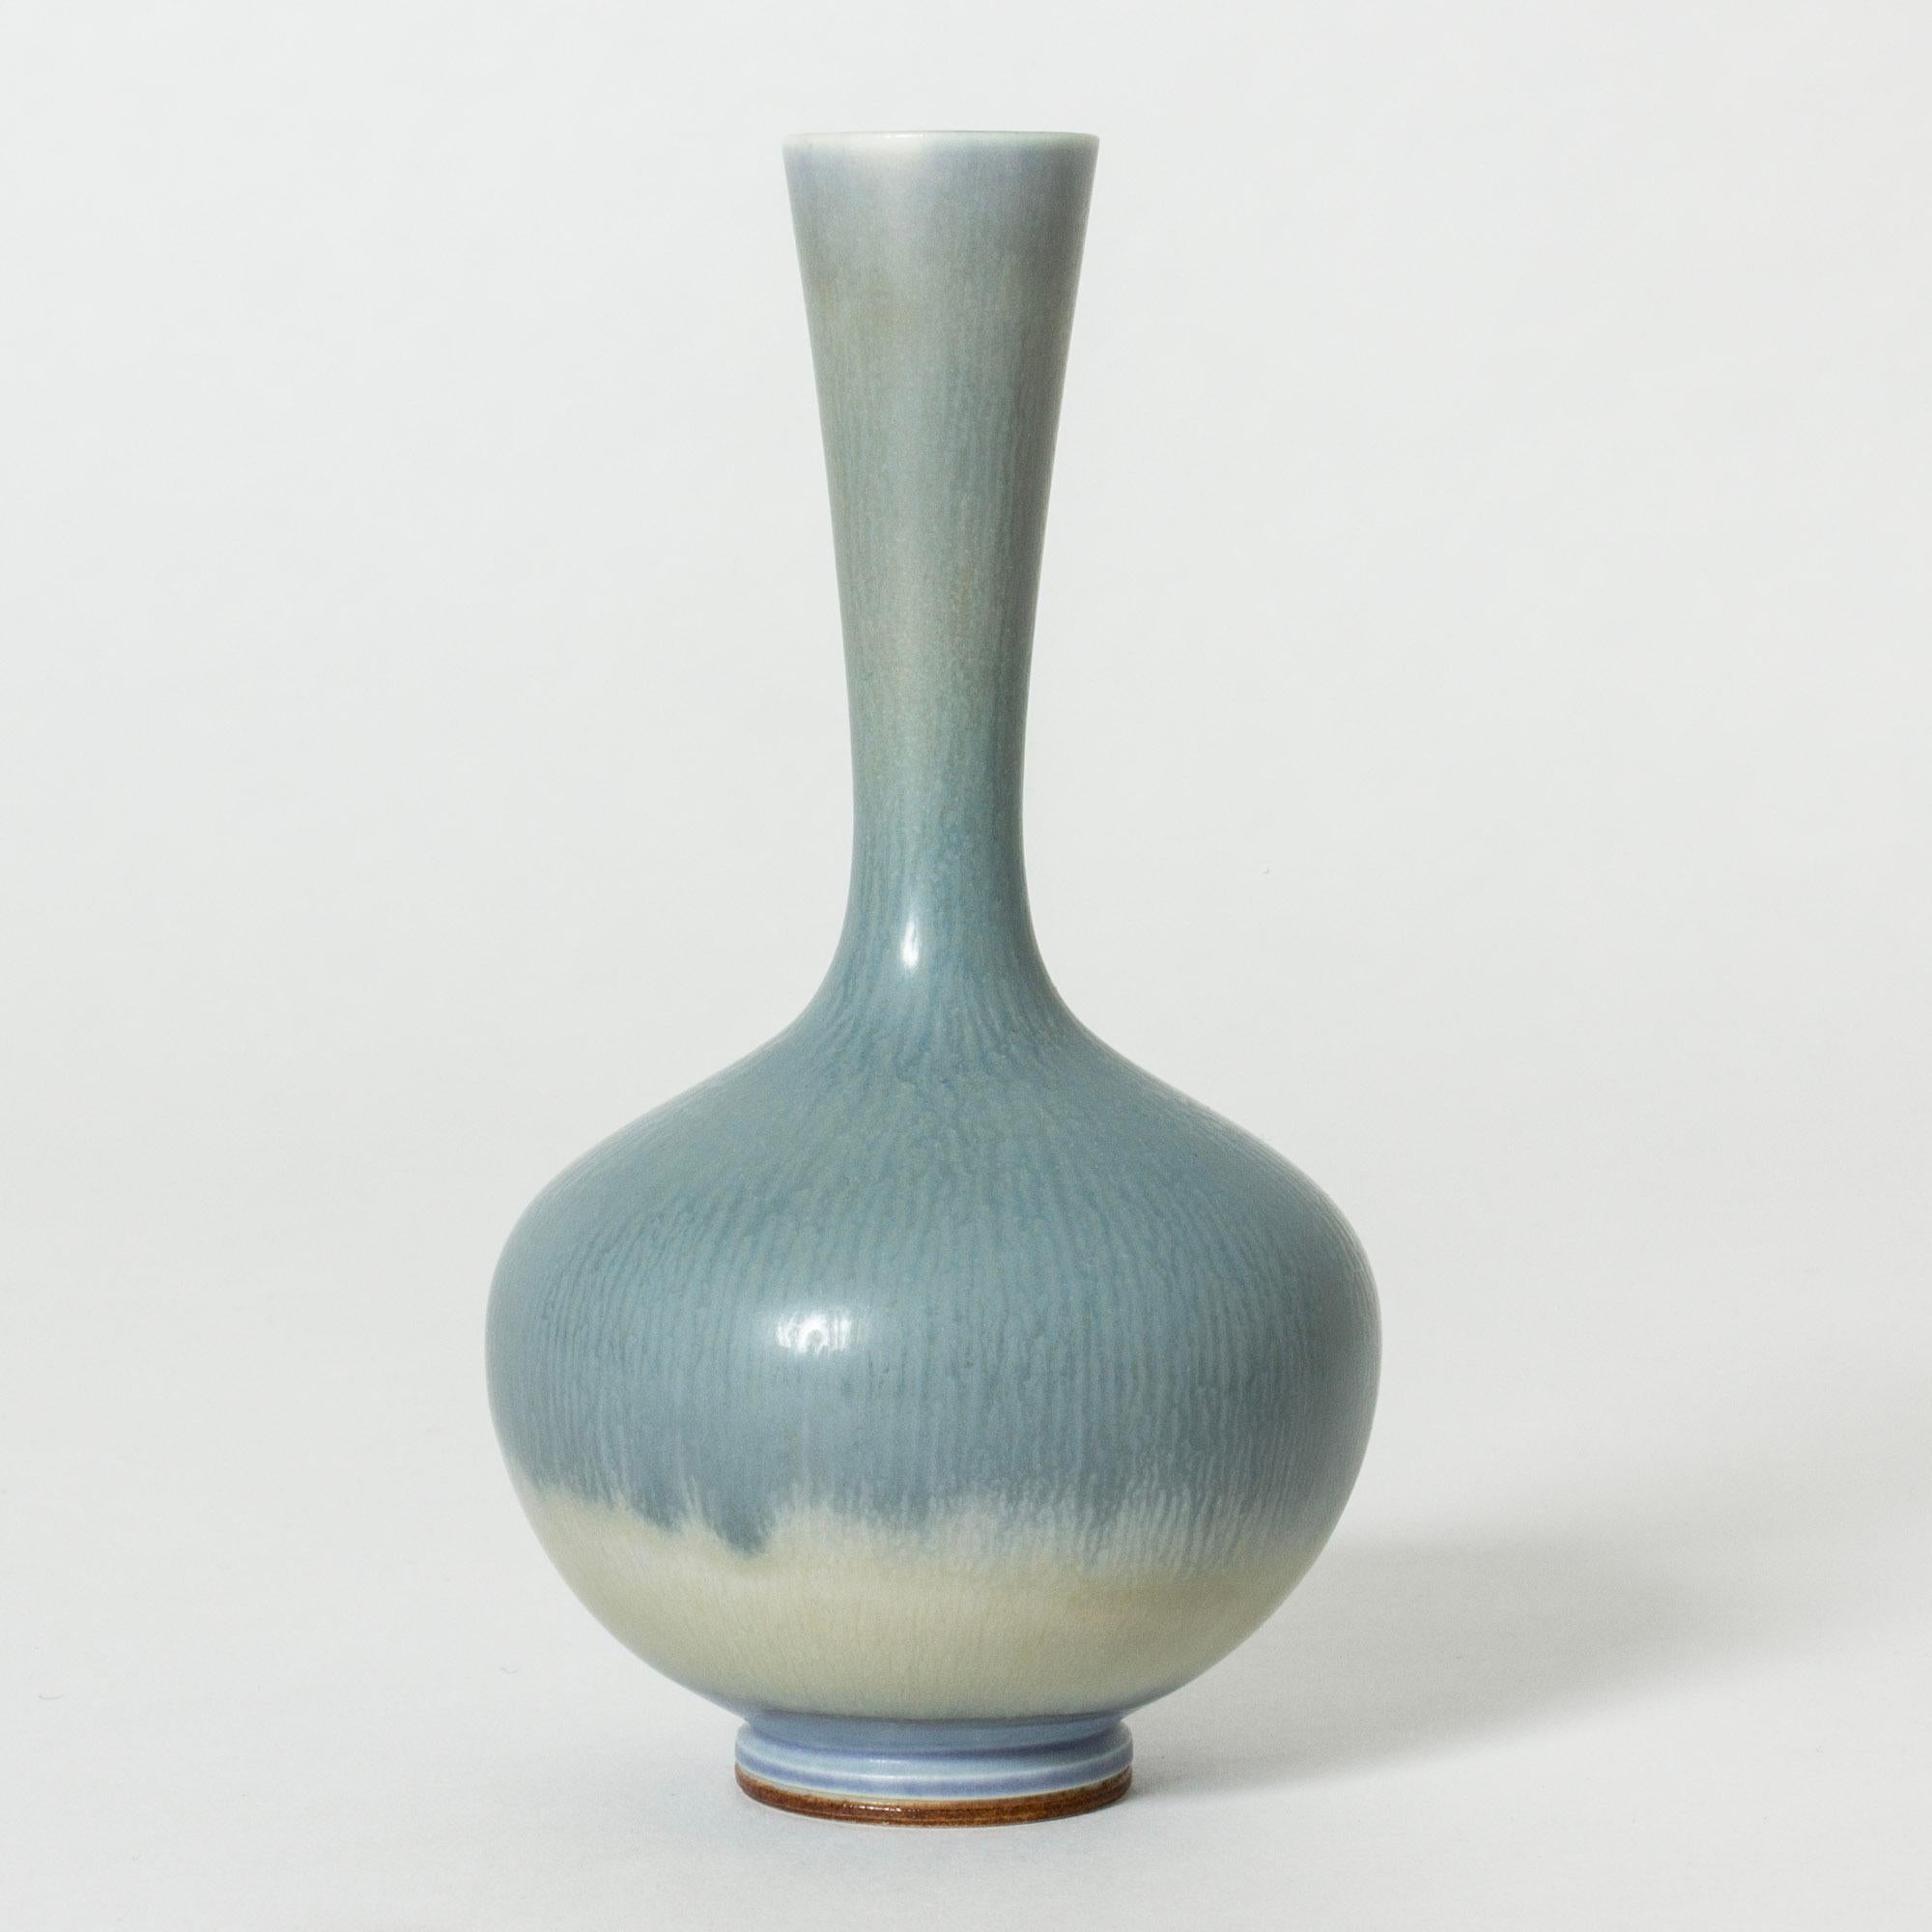 Lovely stoneware vase by Berndt Friberg, with a slender neck and plump onion shaped base. Sky blue with transition to white hare’s fur glaze.

Berndt Friberg was a Swedish ceramicist, renowned for his stoneware vases and vessels for Gustavsberg. His